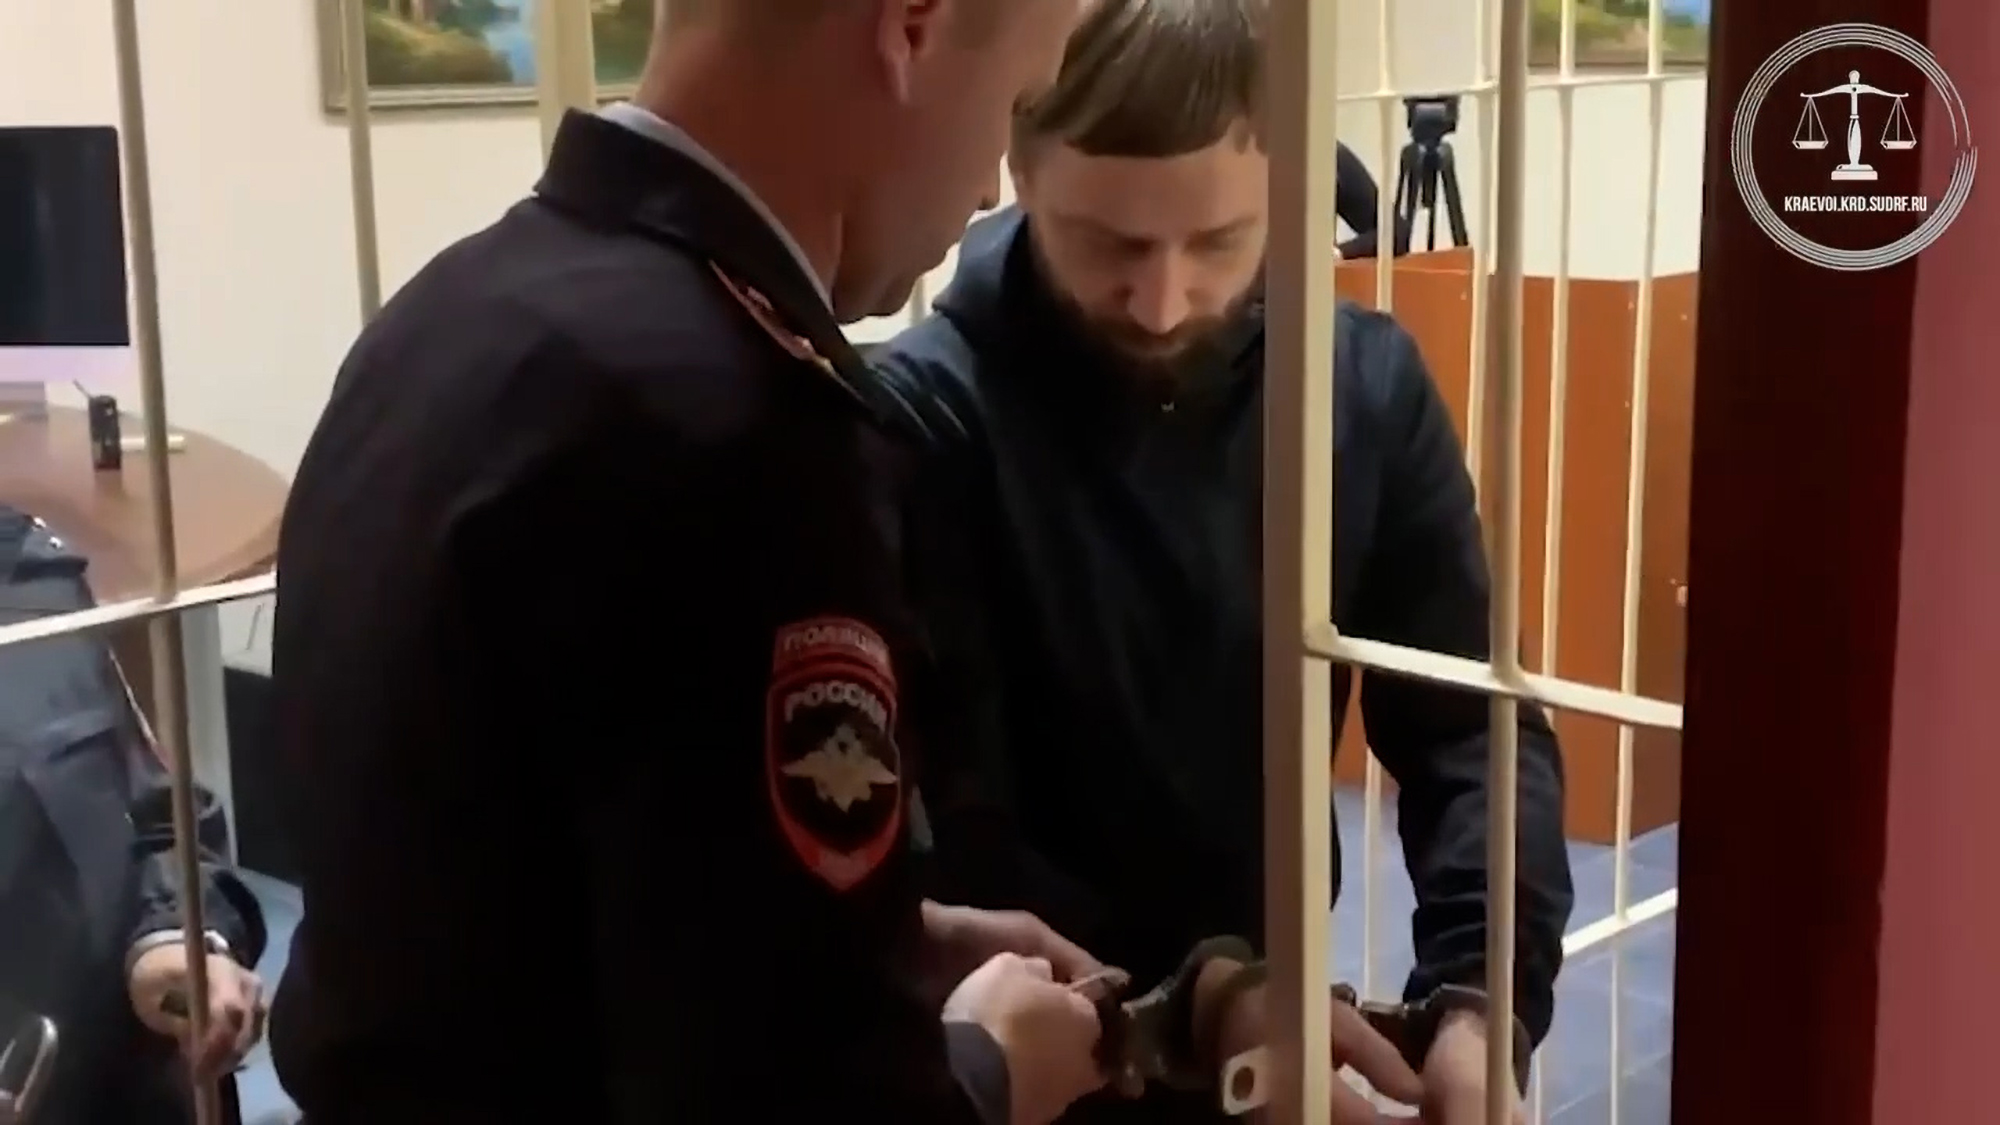 Lyutyi  has been arrested and the case is ongoing